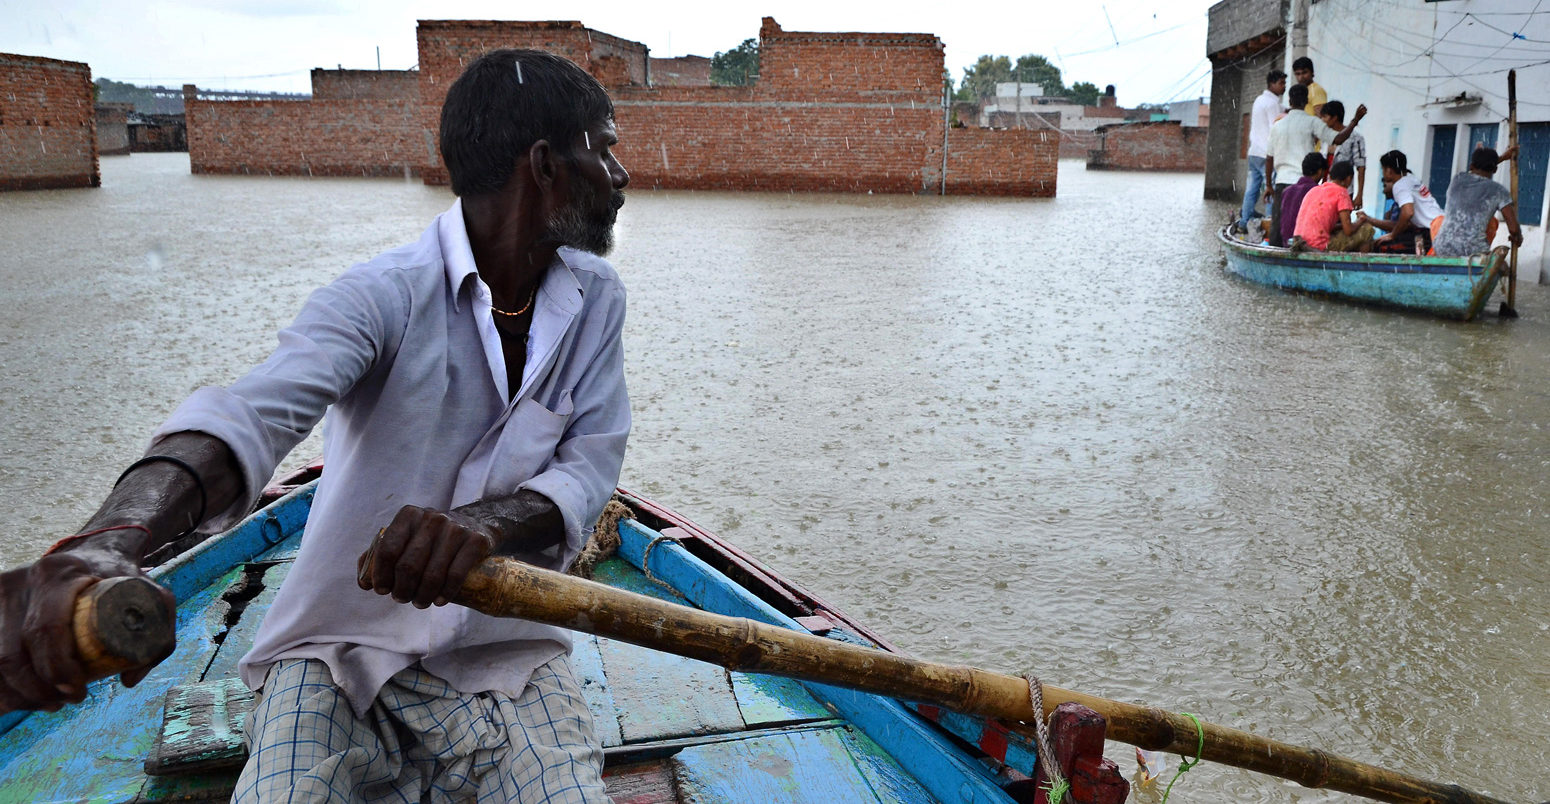 A man paddles a boat in the flooded village of Varanasi, India